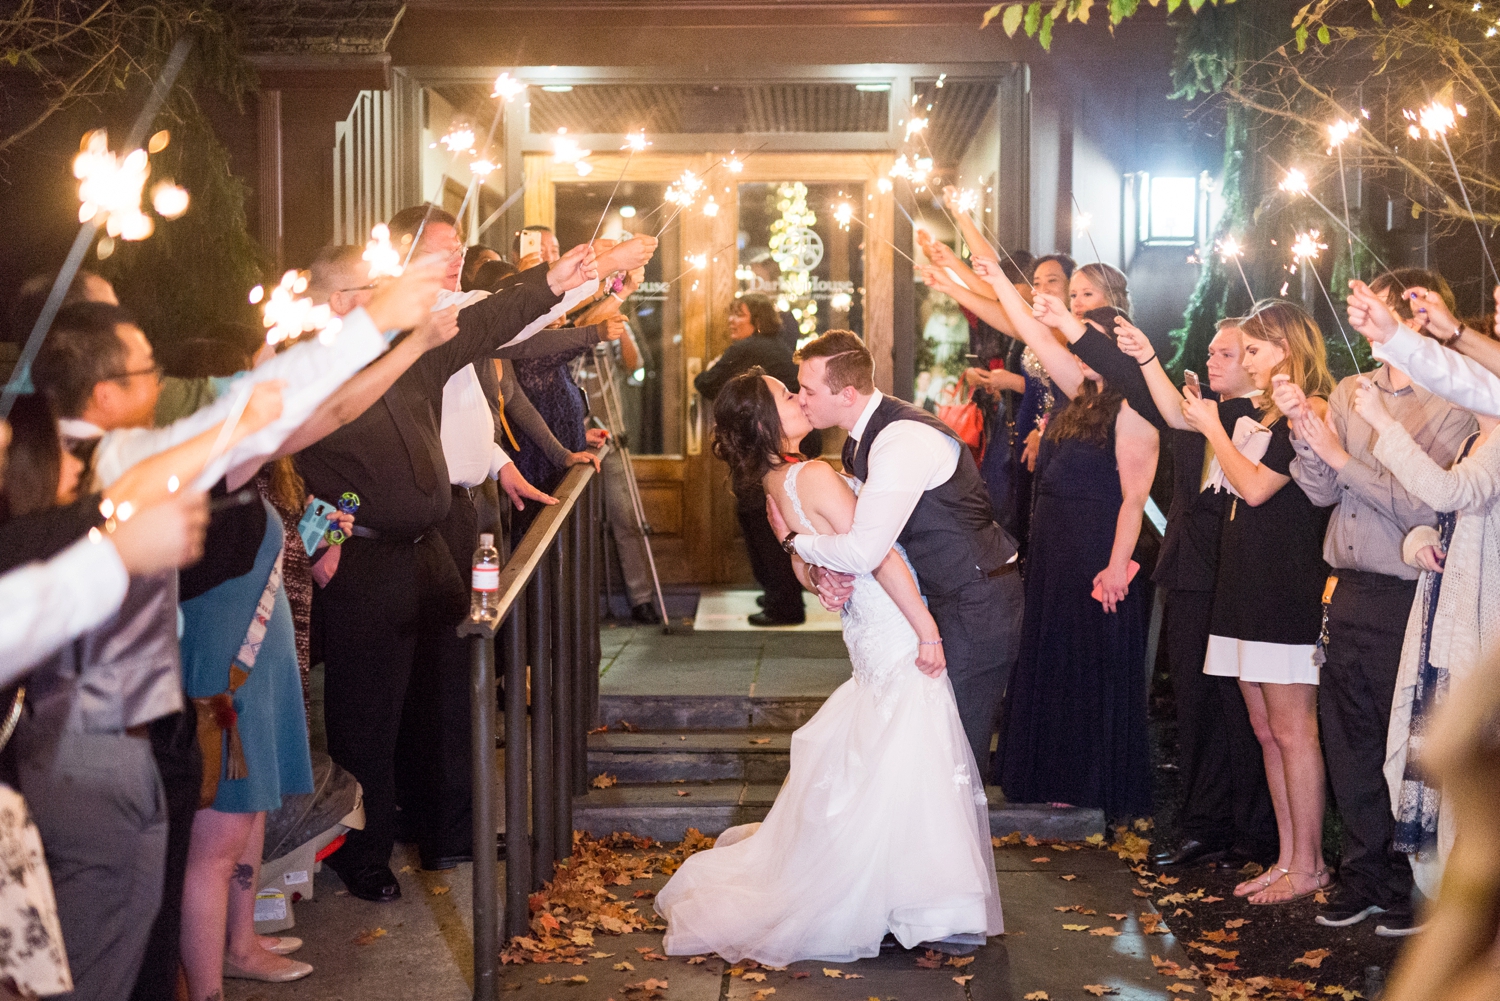 sparkler-exit-at-the-farm-wedding-venue-darby-house-in-galloway